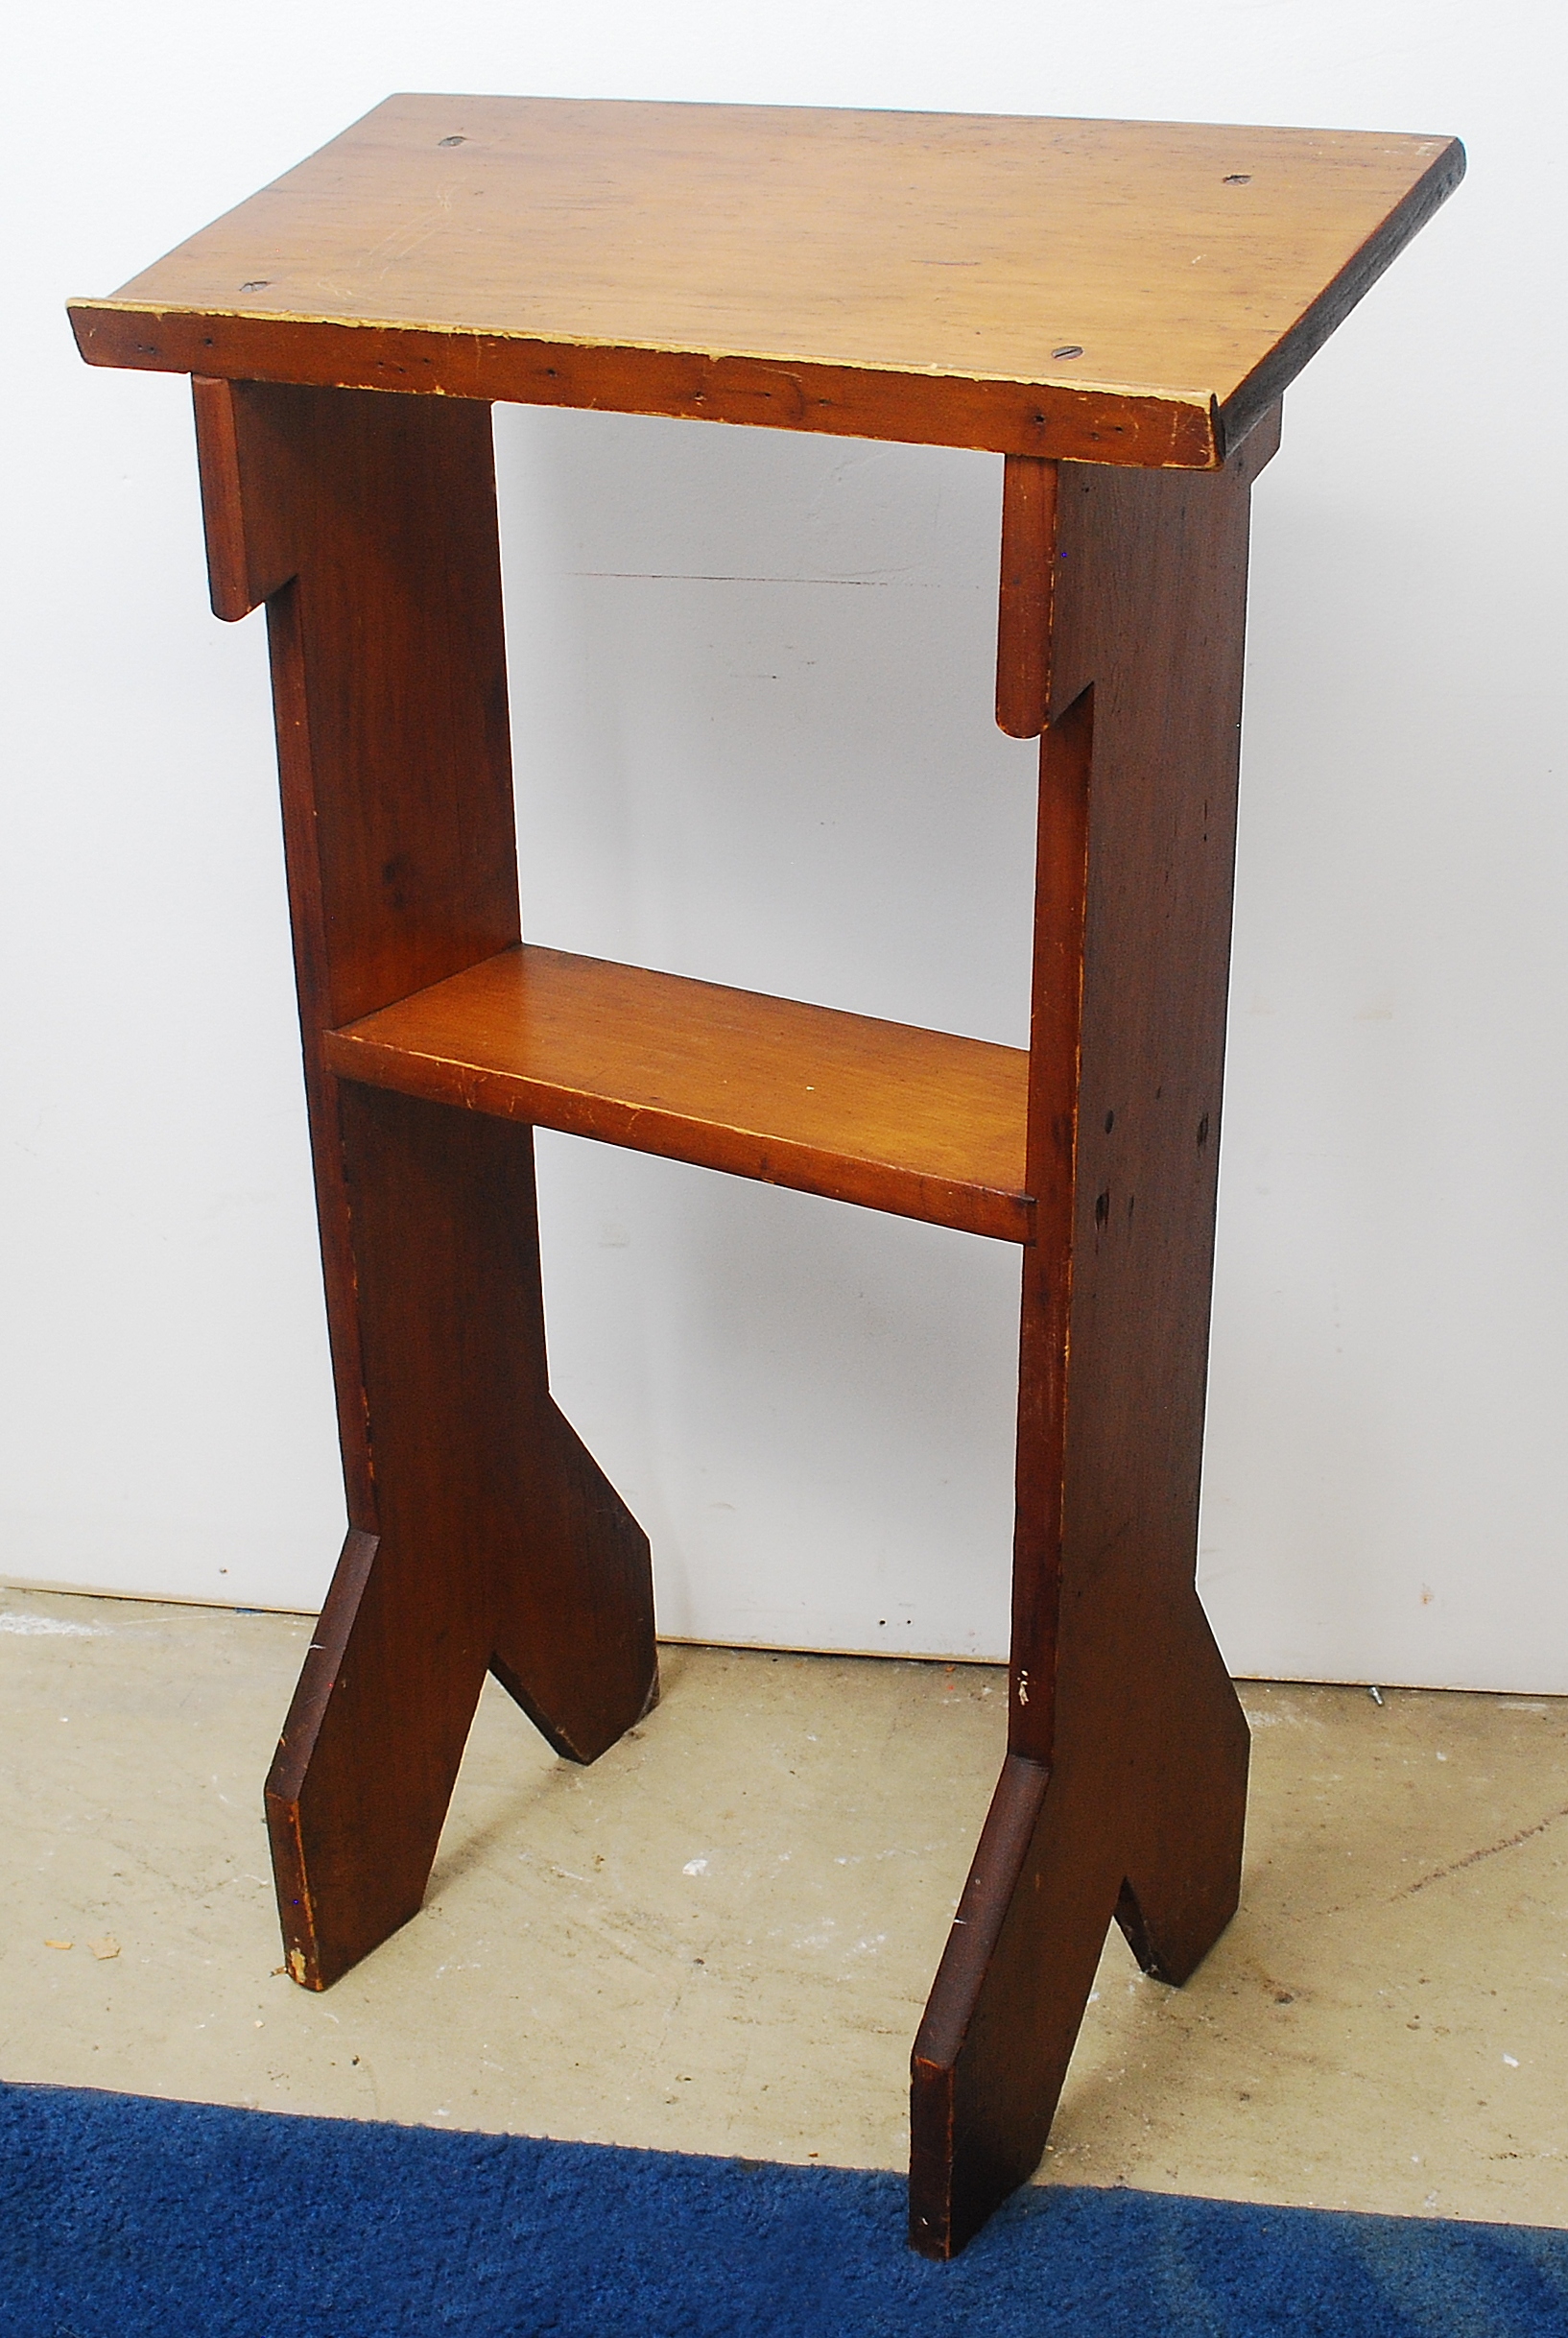 Product image of a wooden kneeler from the furniture product offerings category